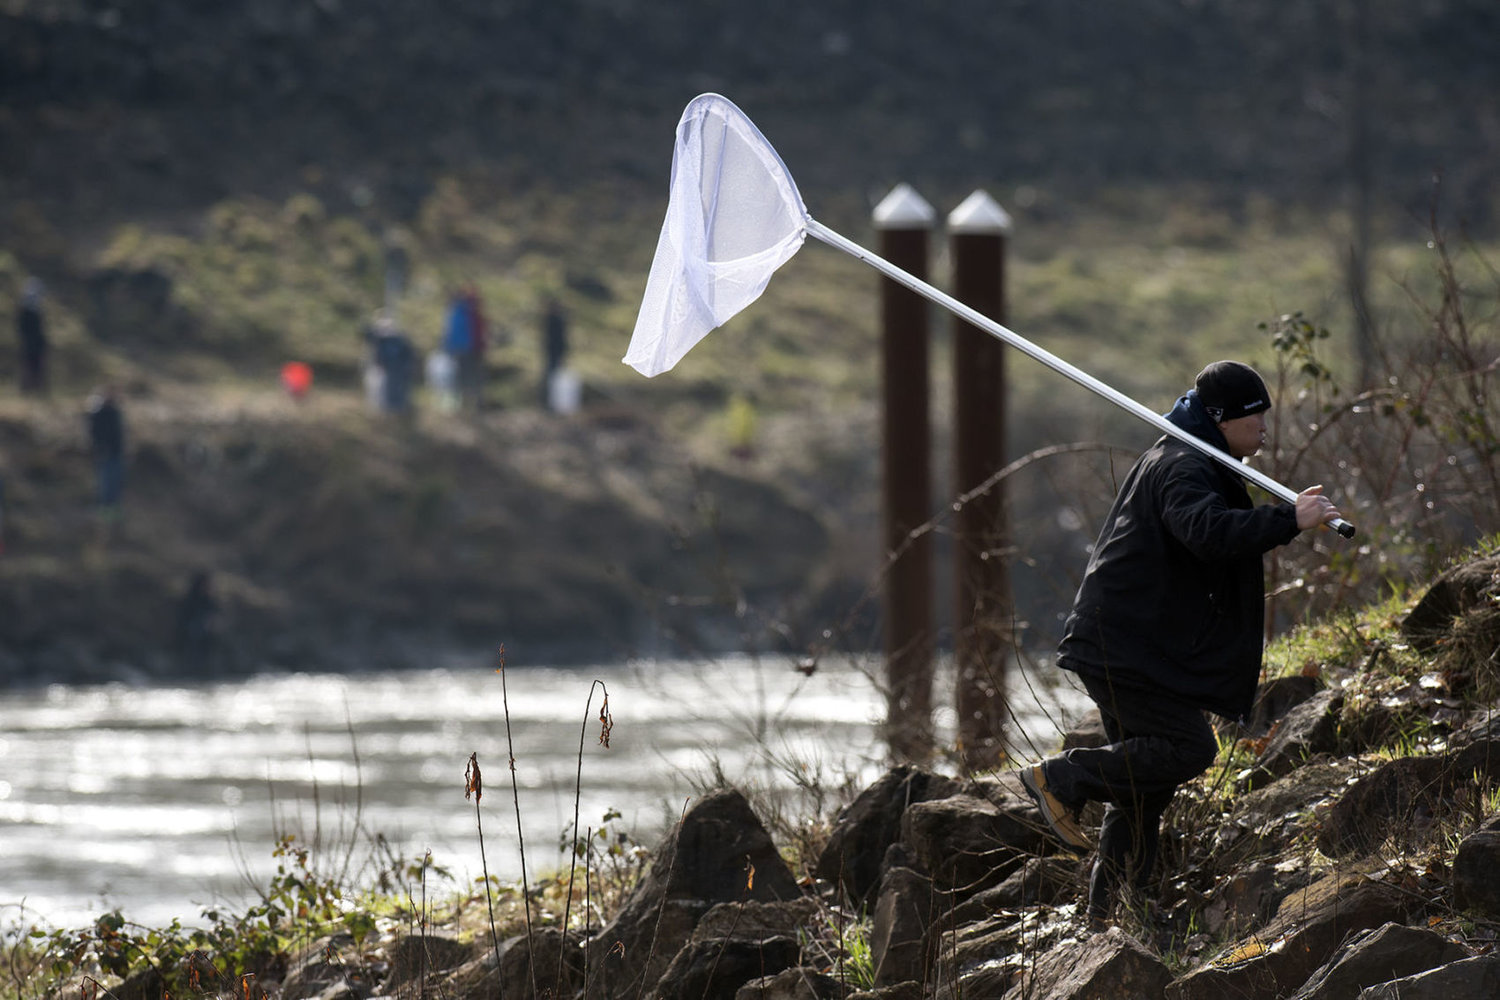 Half-day smelt dip opens on Cowlitz River after 35,000 pounds netted on  Valentine's Day